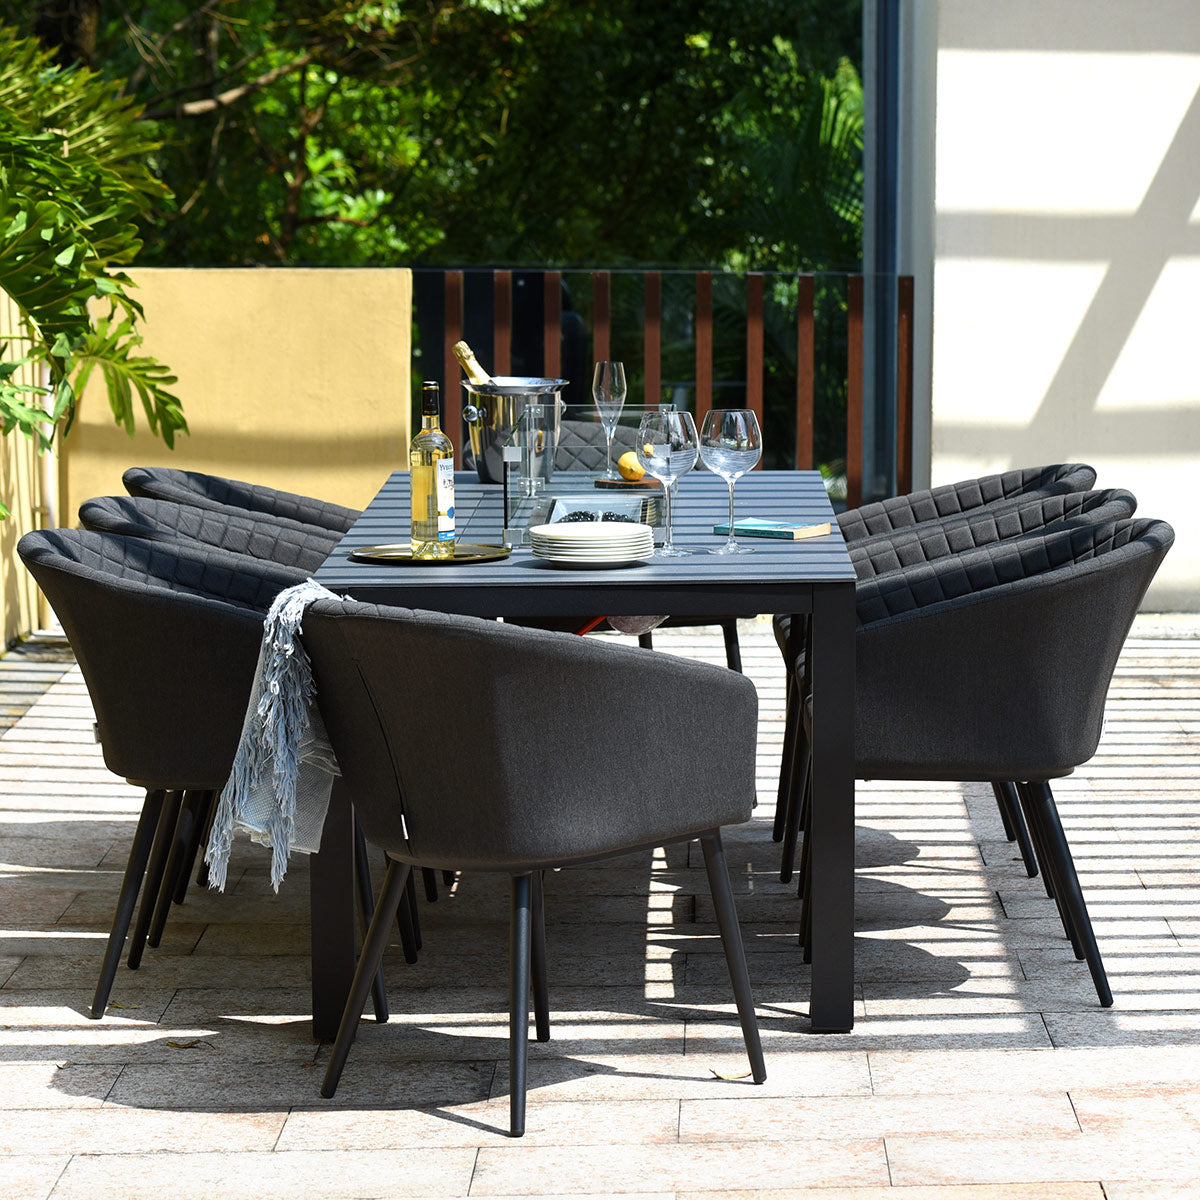 Maze - Outdoor Fabric Ambition 8 Seat Rectangular Dining Set with Fire Pit Table - Charcoal